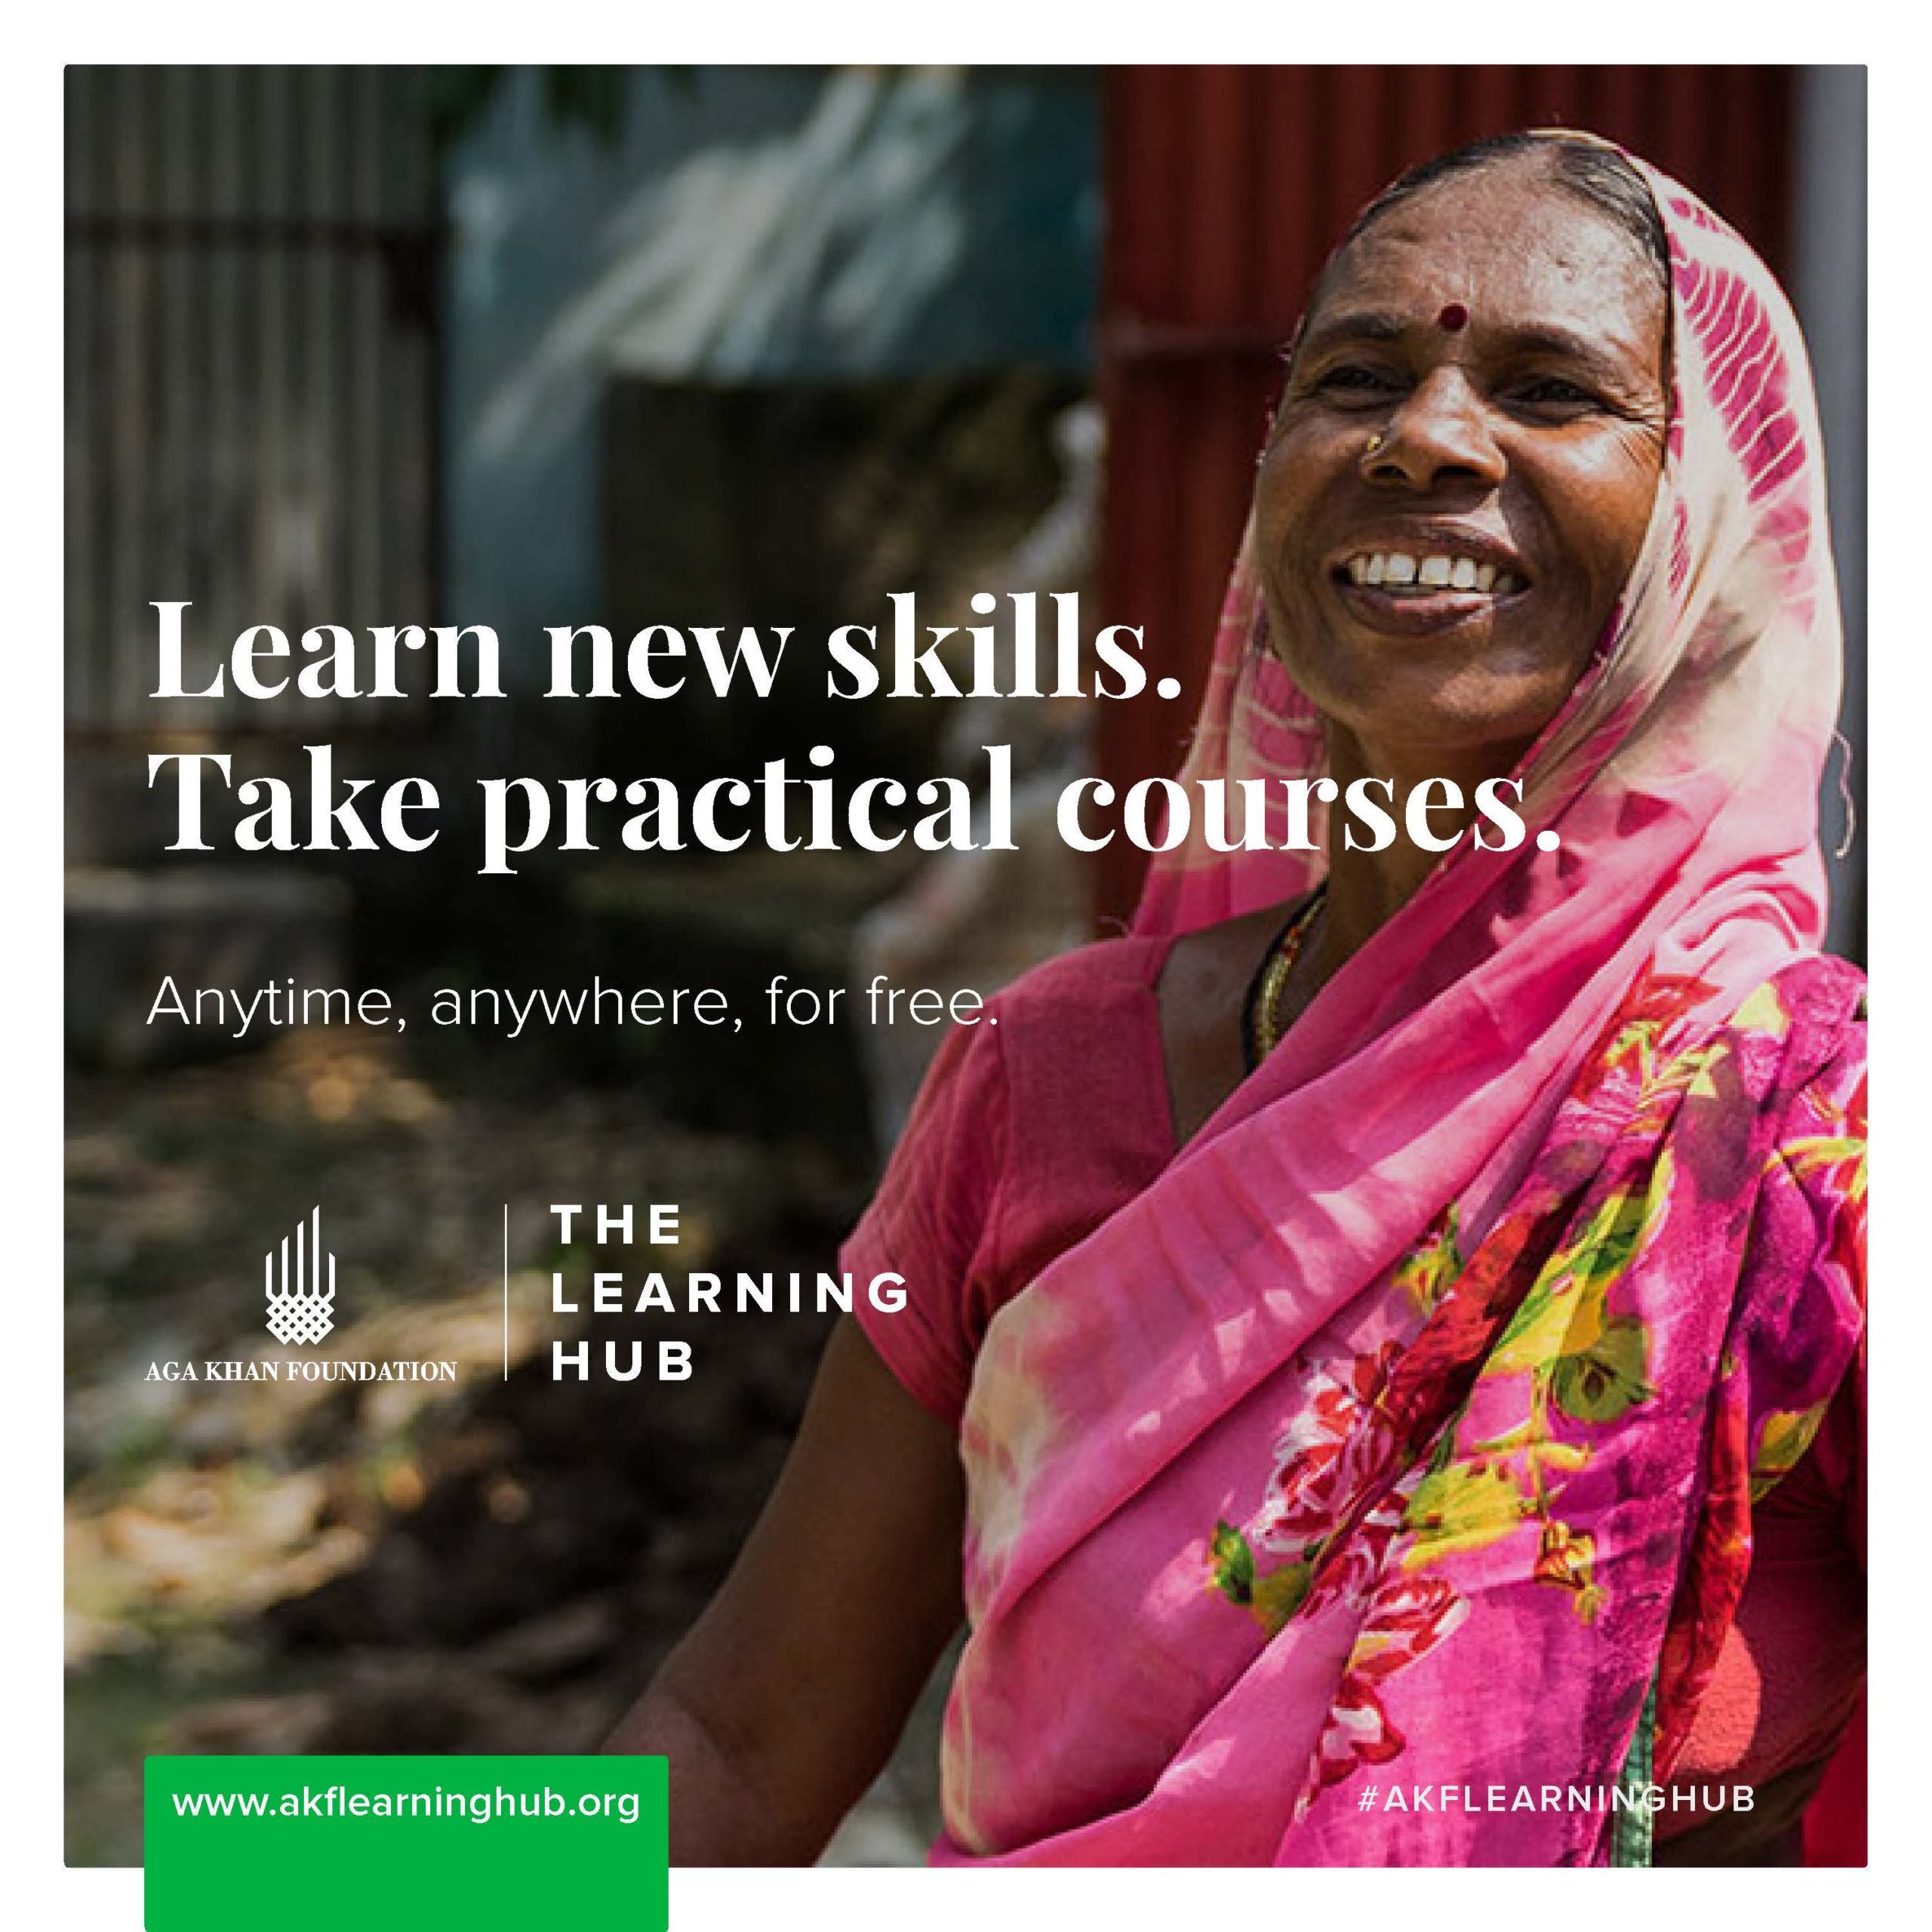 A woman wearing a pink sari smiles. Overlaid text saying "Learn new skills. Take practical courses."